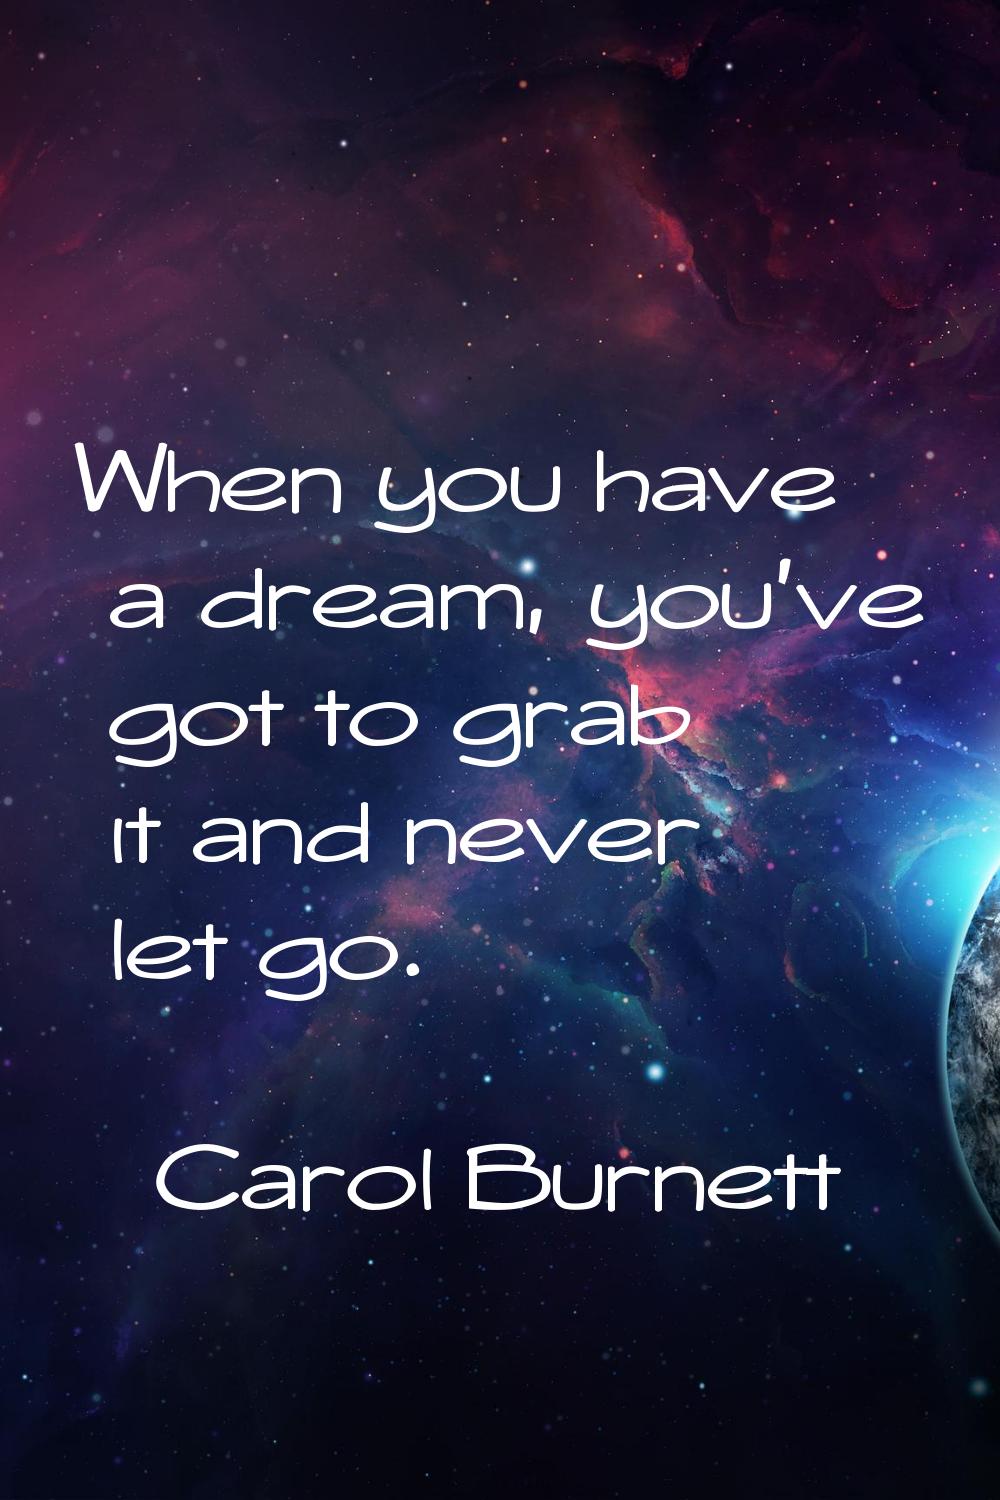 When you have a dream, you've got to grab it and never let go.